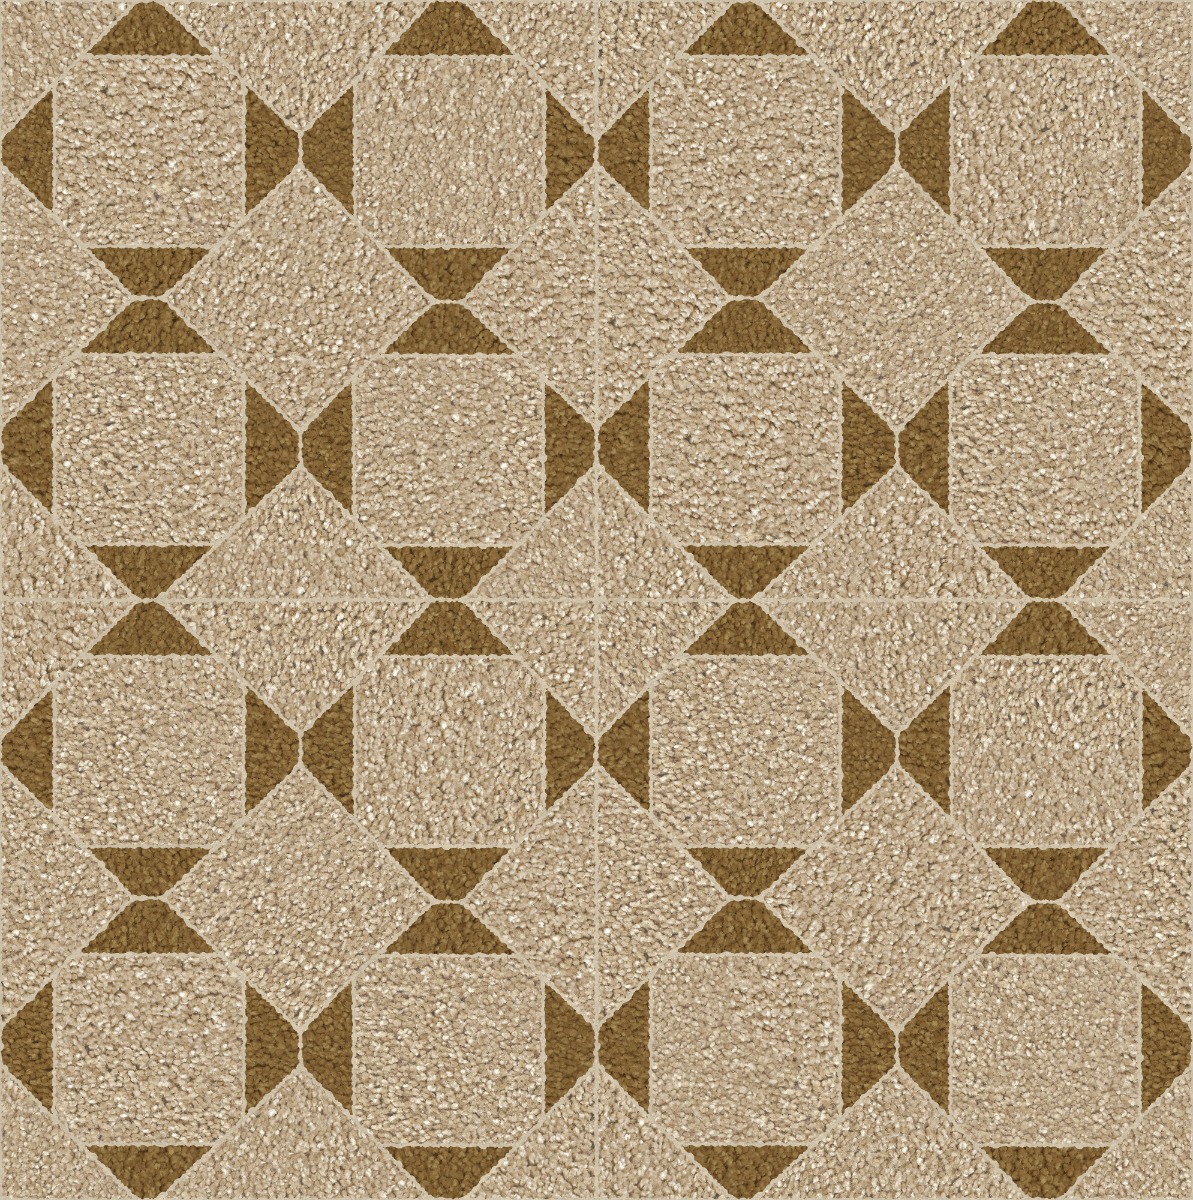 A seamless carpet texture with saxony carpet units arranged in a Diamond Weave pattern